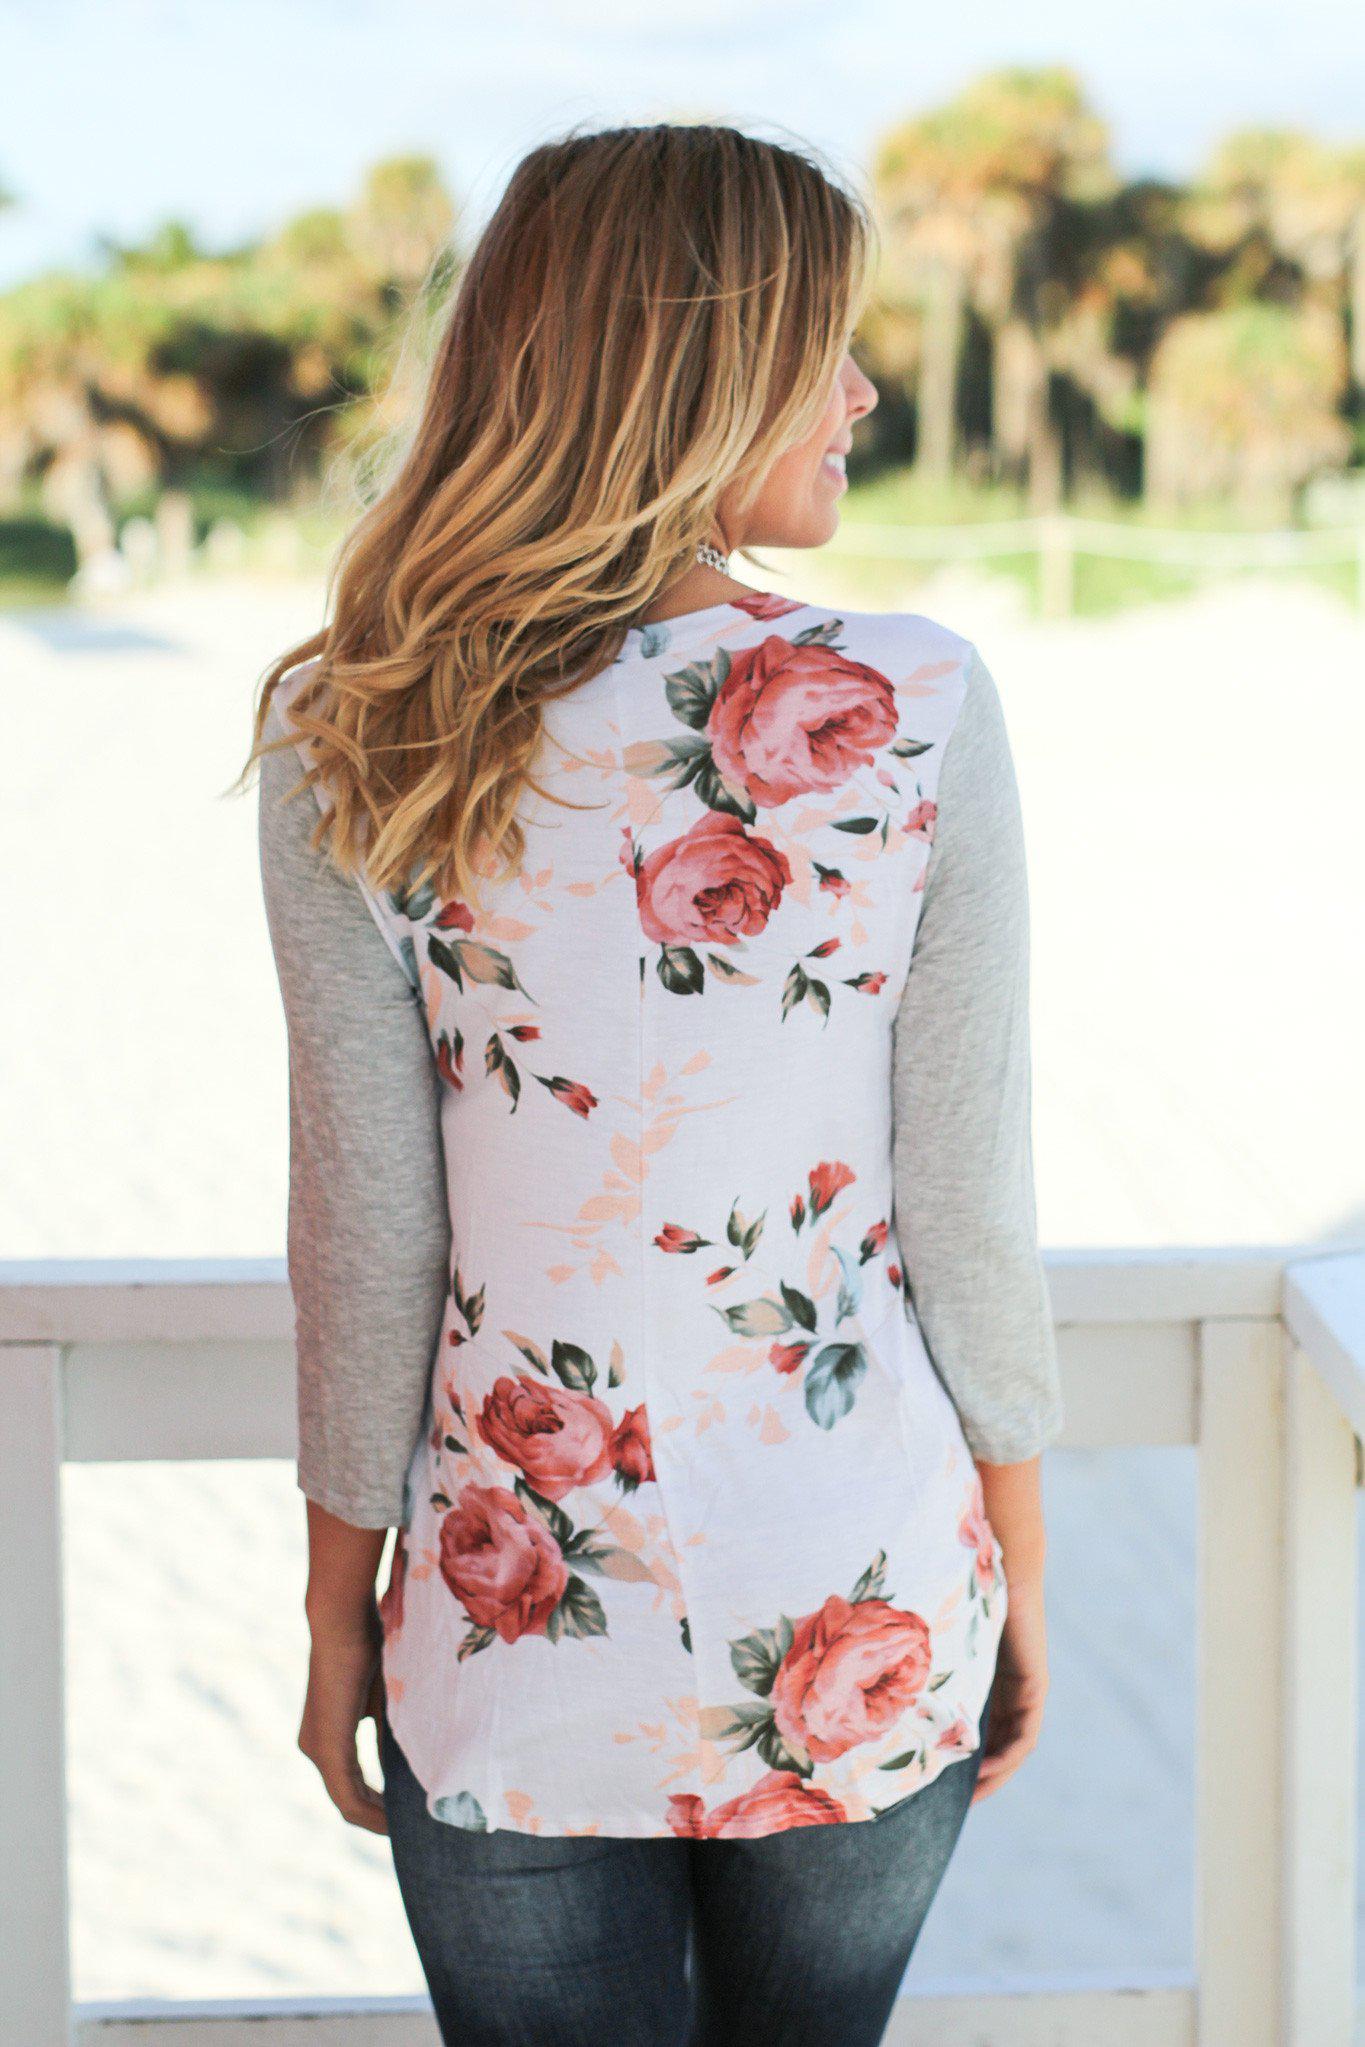 Floral Top with Gray Sleeves